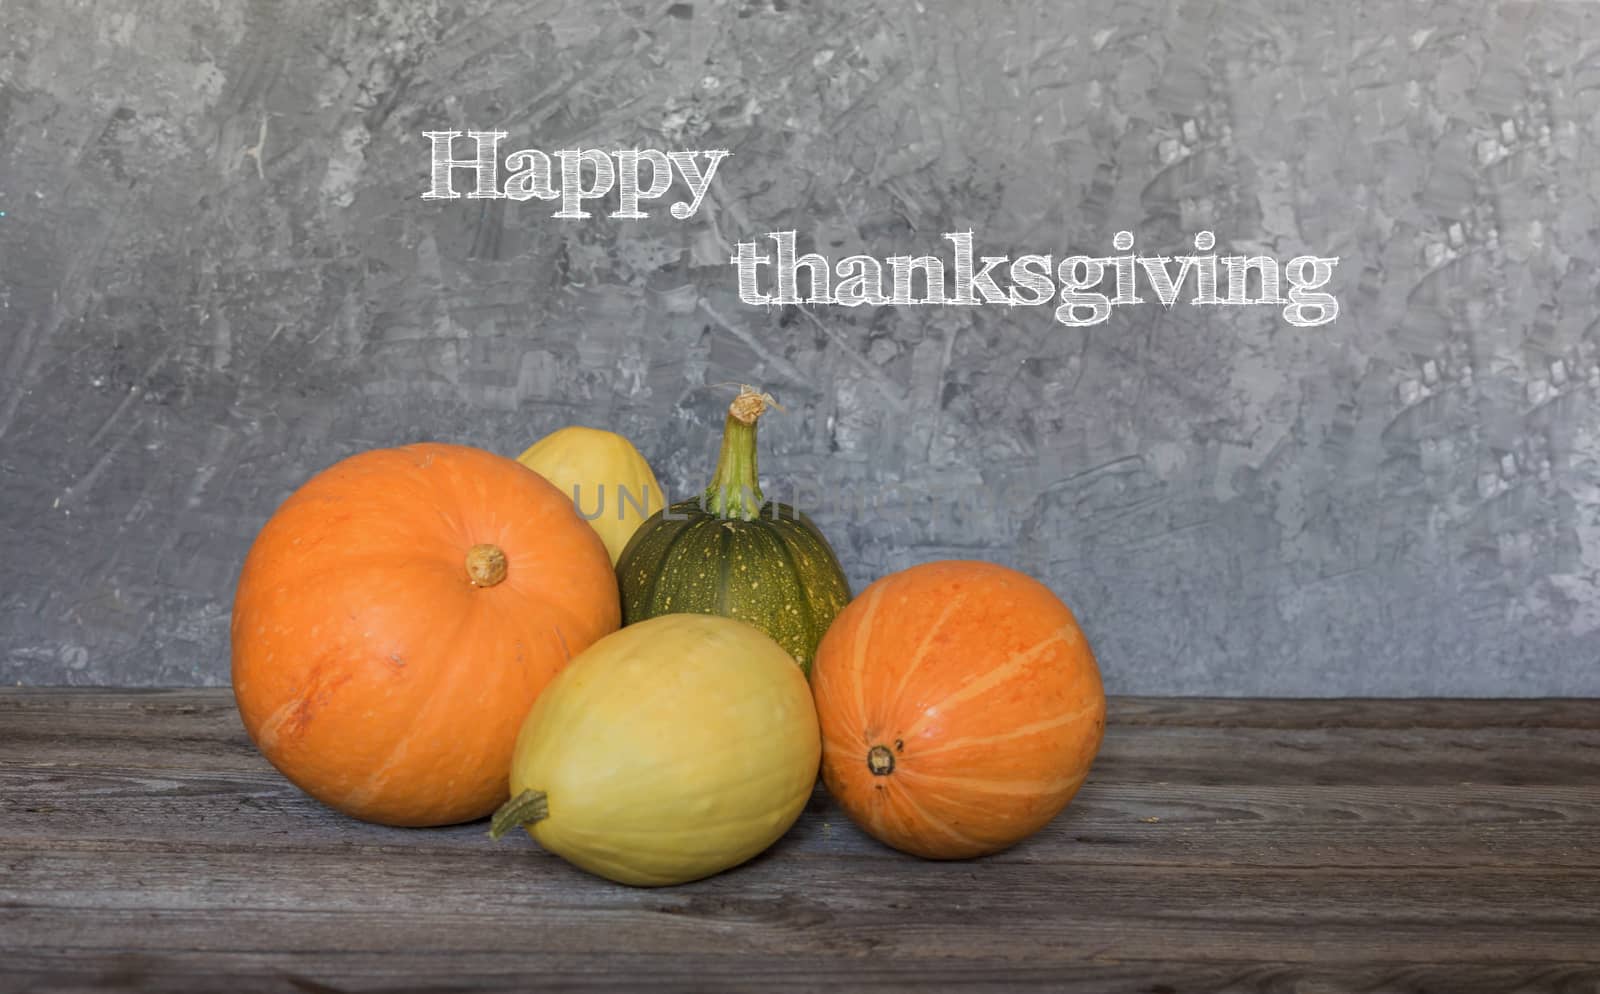 Happy Thanksgiving greeting text with colorful pumpkins over concrete background by galinasharapova